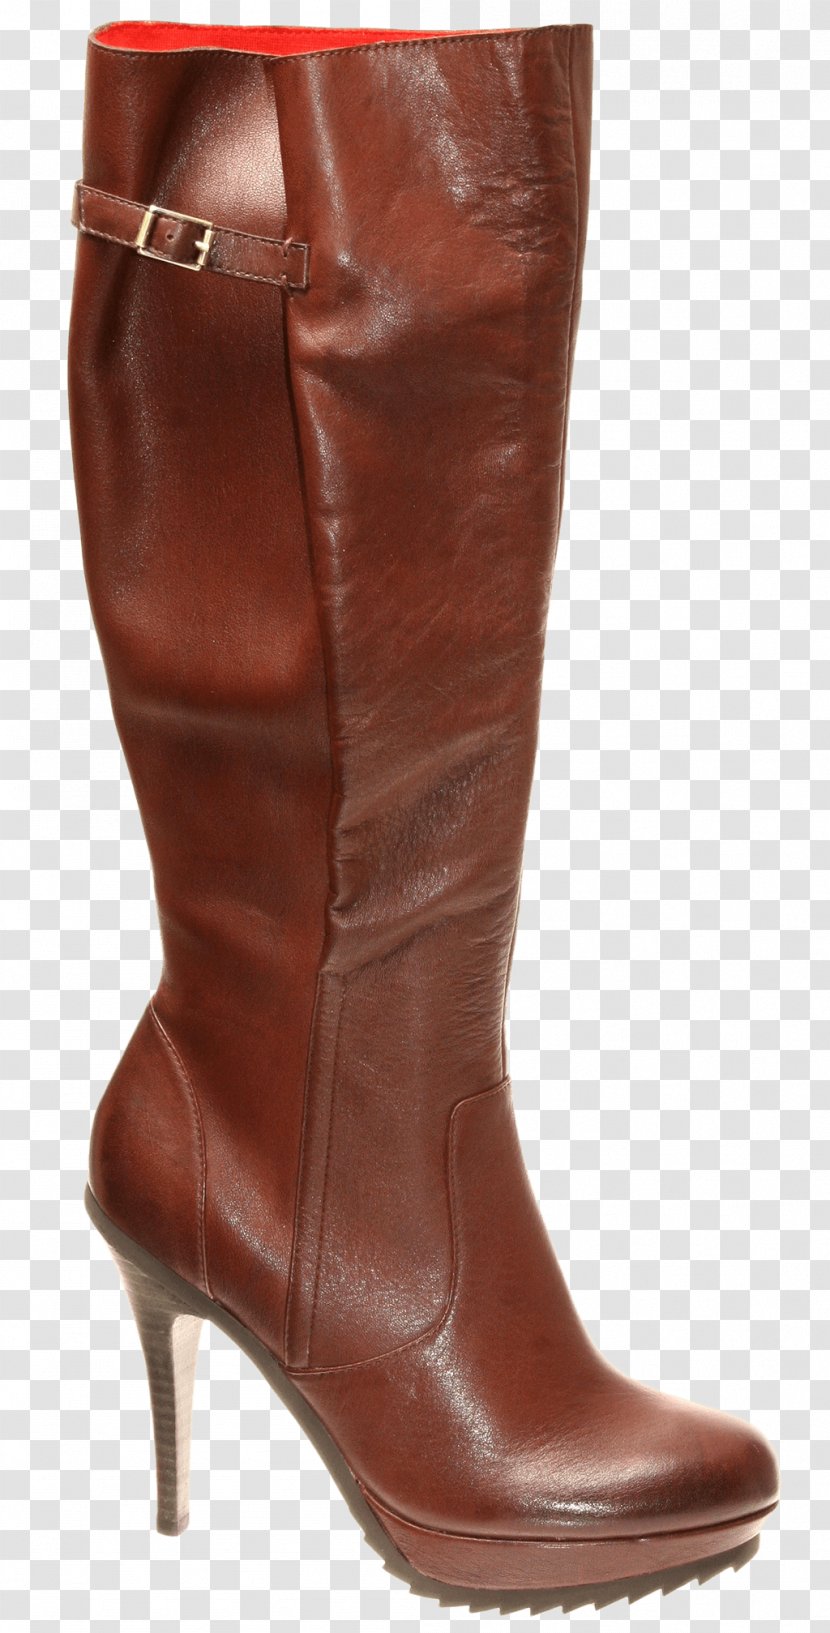 Riding Boot Shoe Roxy's Place Leather - High Heeled Footwear - Knee Boots Transparent PNG